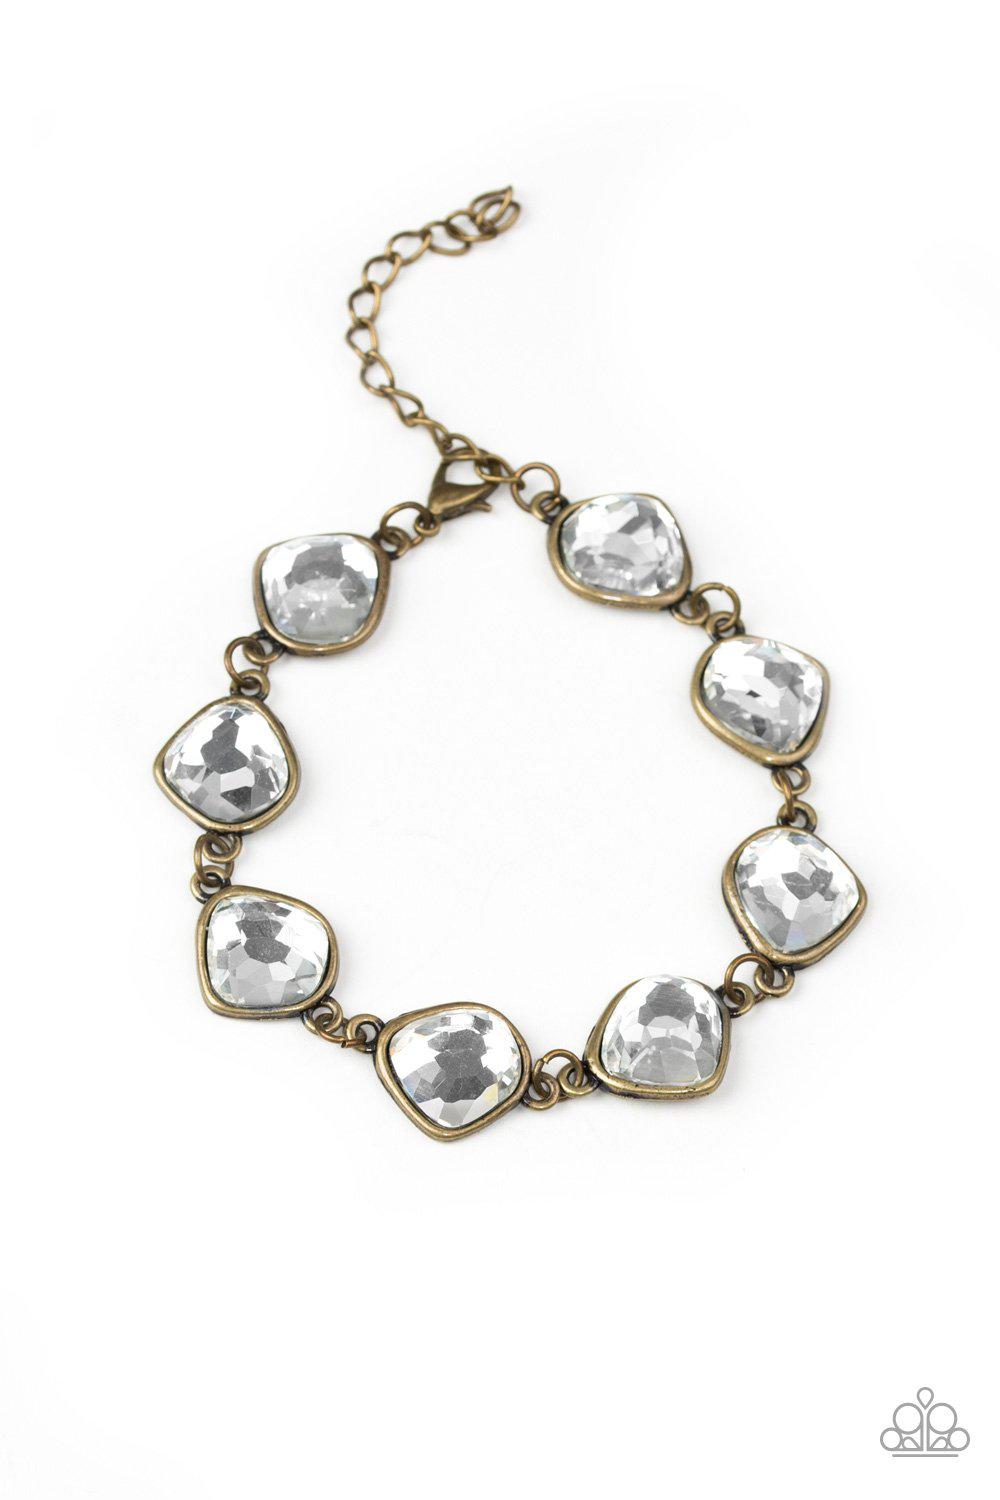 Perfect Imperfection Brass and White Rhinestone Bracelet - Paparazzi Accessories- lightbox - CarasShop.com - $5 Jewelry by Cara Jewels